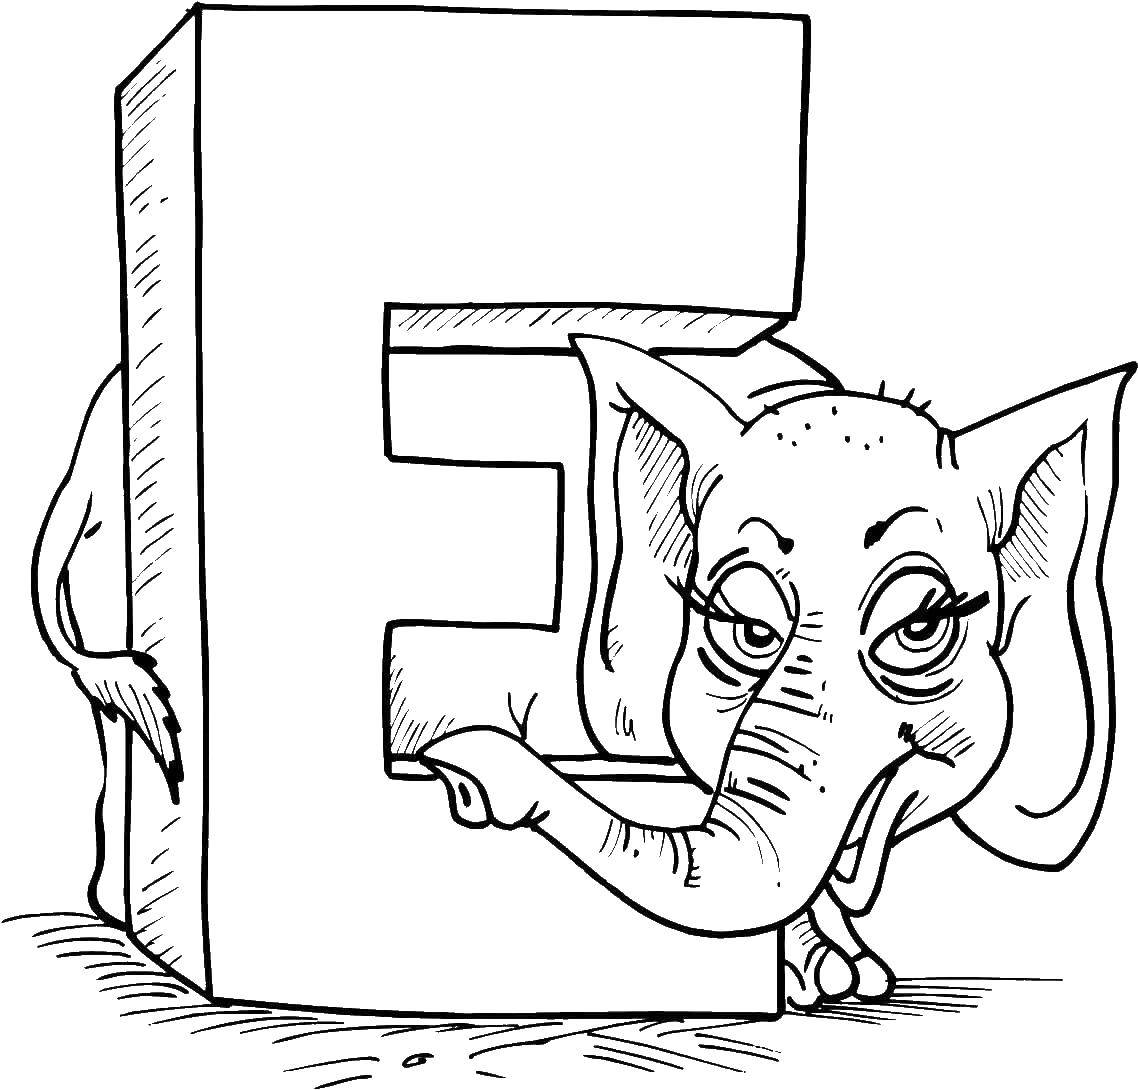 Coloring Elephant and English letter e. Category English alphabet. Tags:  elephant, letter E.